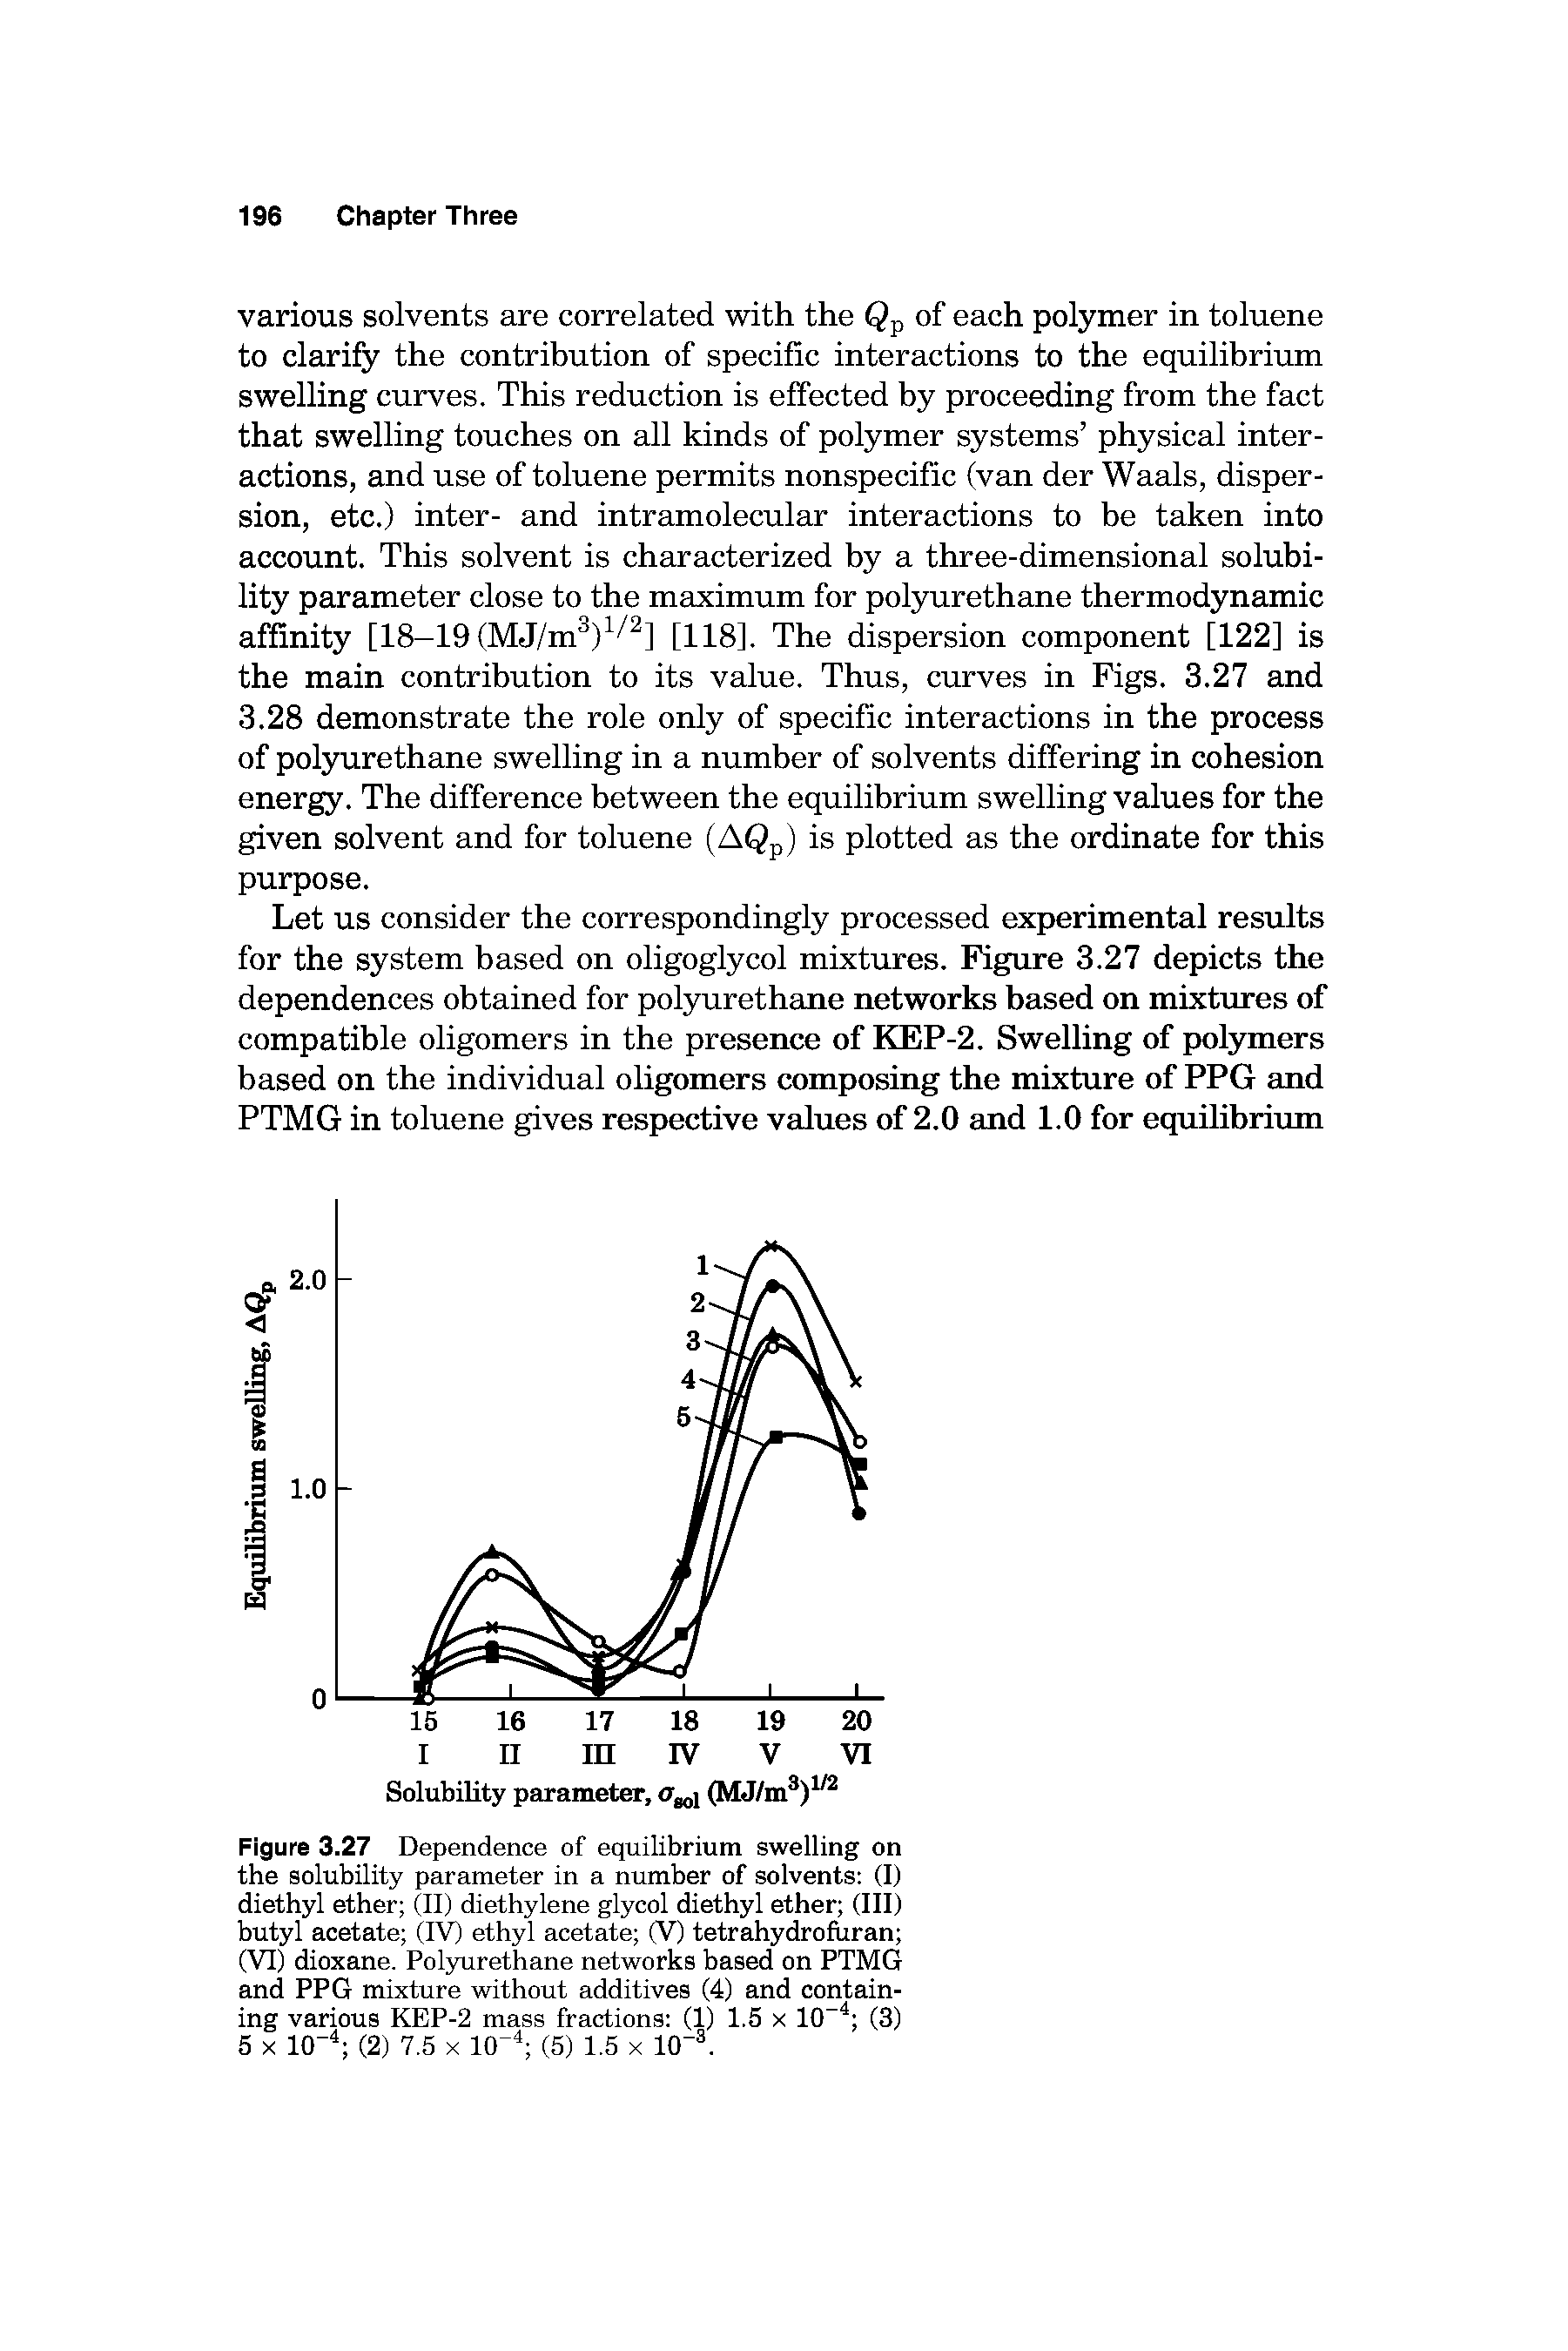 Figure 3.27 Dependence of equilibrium swelling on the solubility parameter in a number of solvents (I) diethyl ether (11) diethylene glycol diethyl ether (III) butyl acetate (IV) ethyl acetate (V) tetrahydrofdran (VI) dioxane. Polyurethane networks based on PTMG and PPG mixture without additives (4) and containing various KEP-2 mass fractions (1) 1.5 x 10 (3) 5 X 10- (2) 7.5 X 10- (5) 1.5 x 10 ...